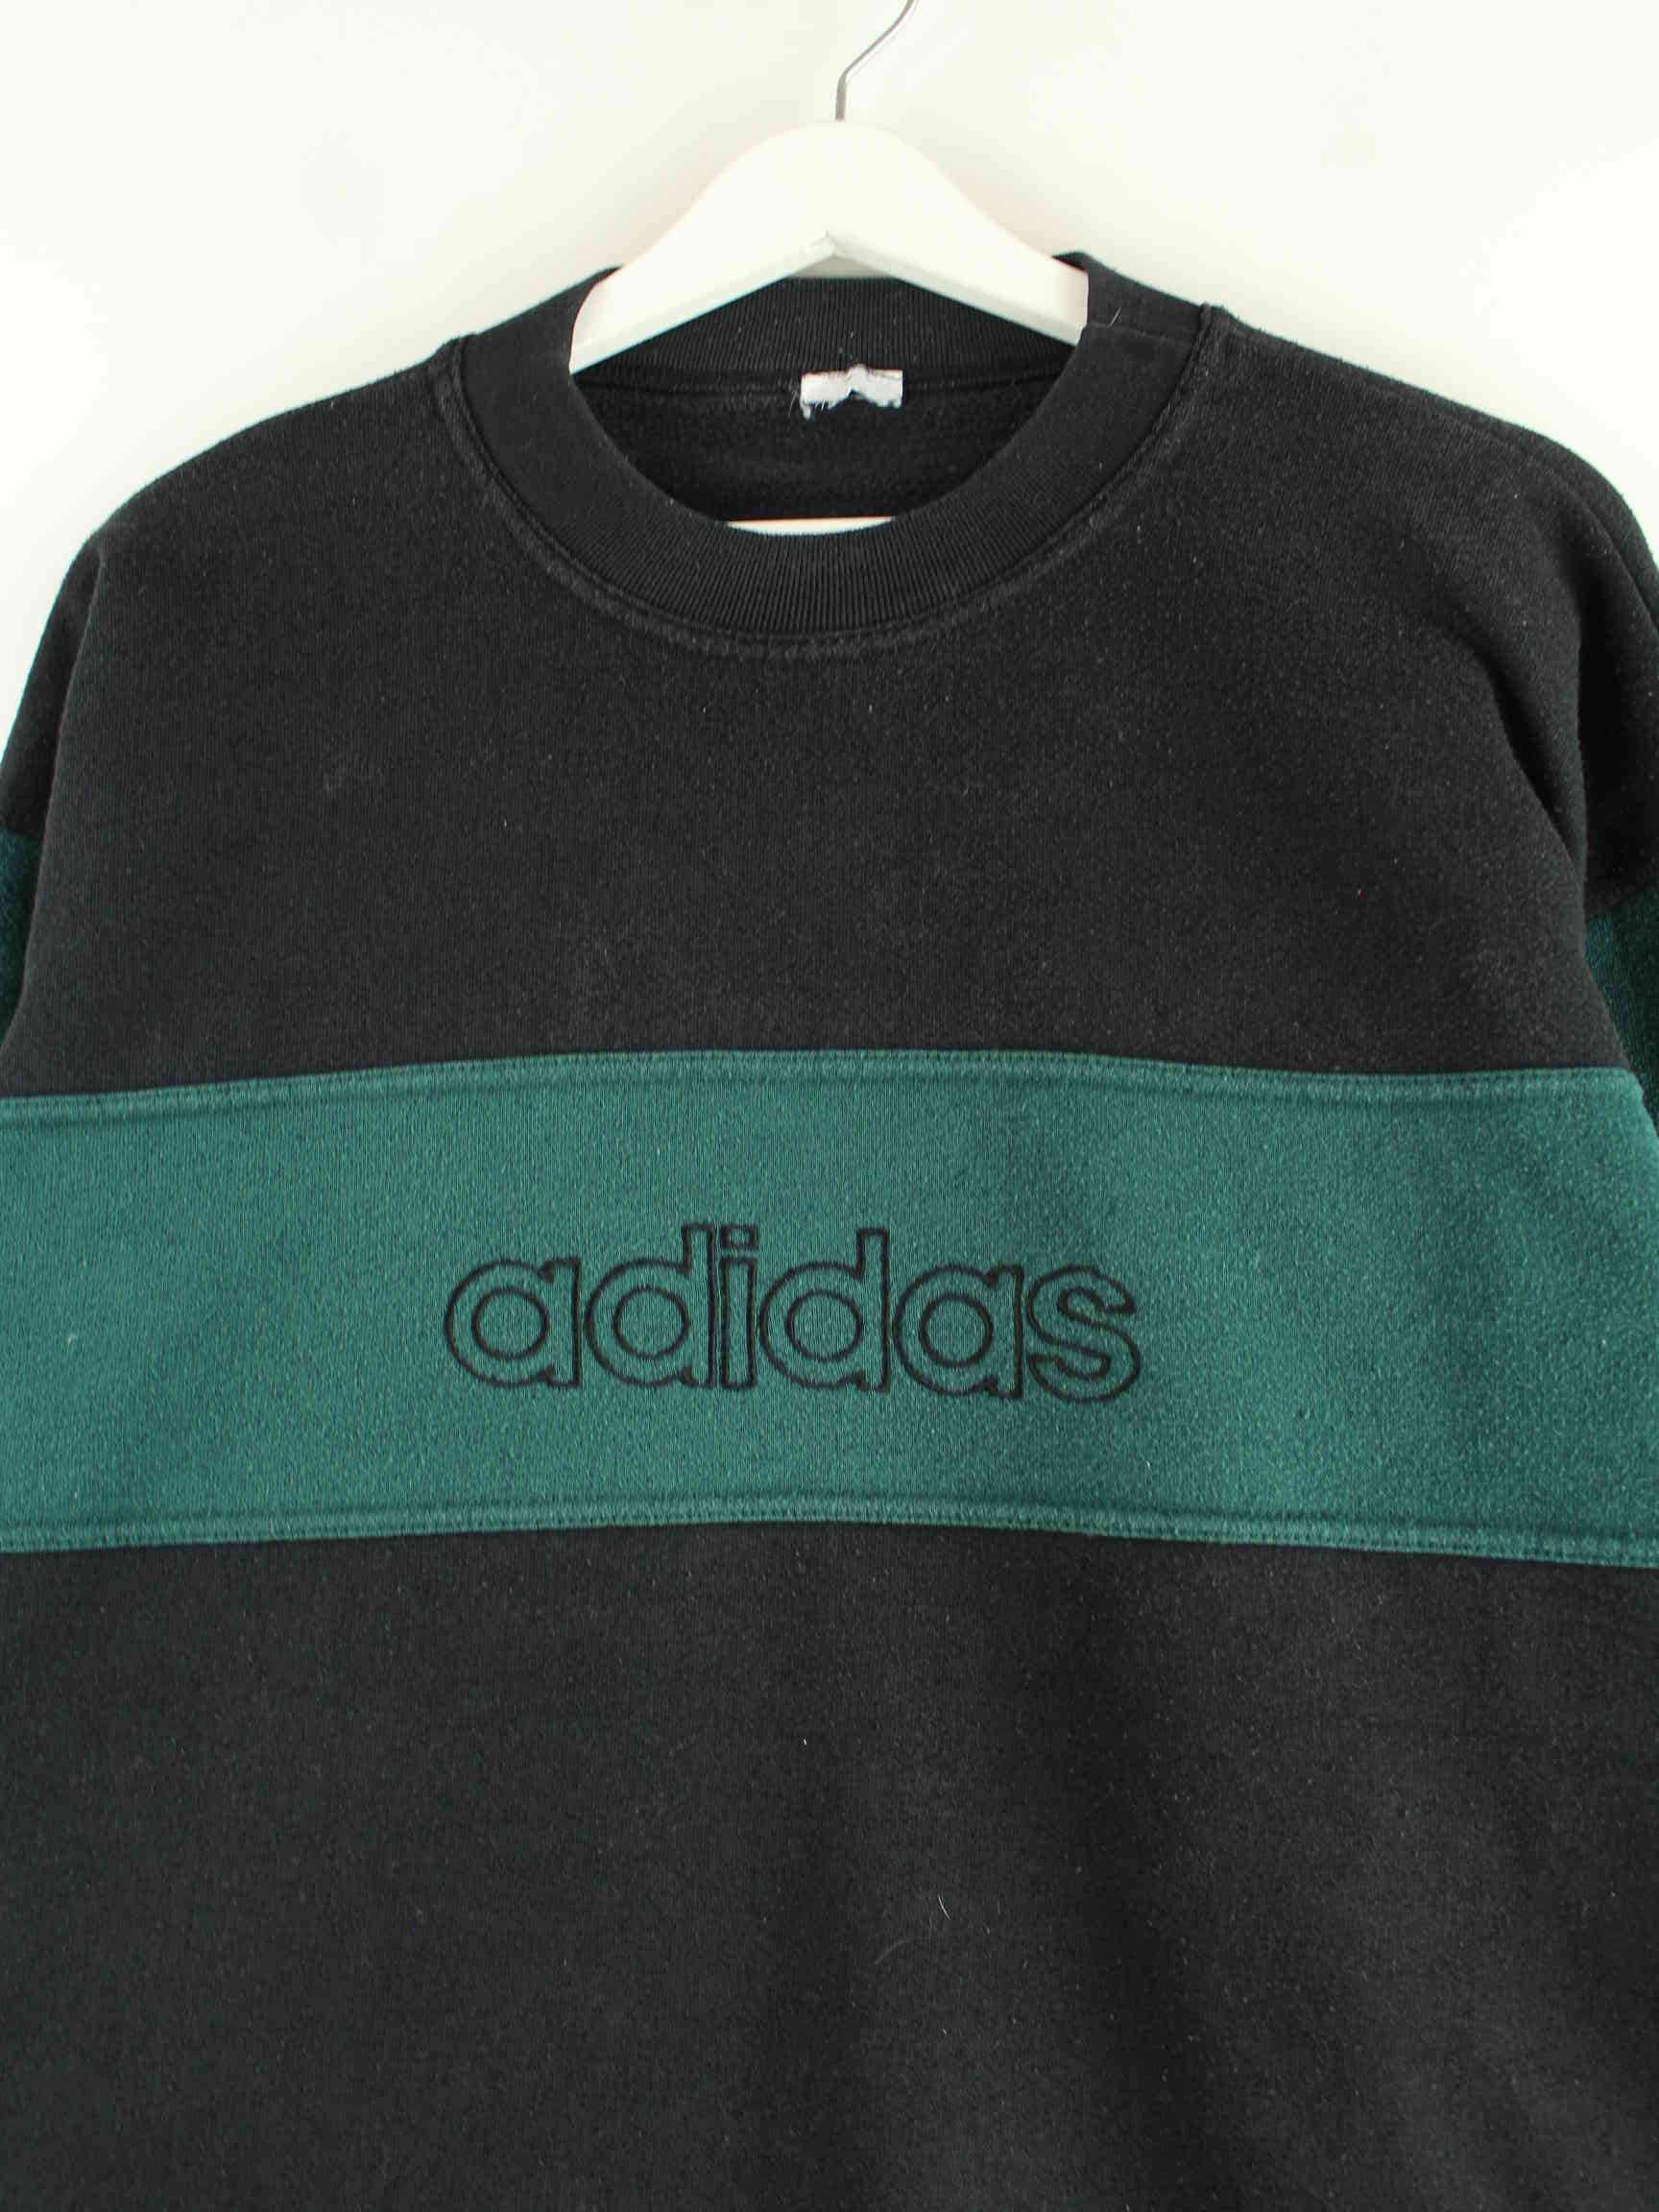 Adidas 90s Vintage Spellout Embroidered Sweater Schwarz M (detail image 1)